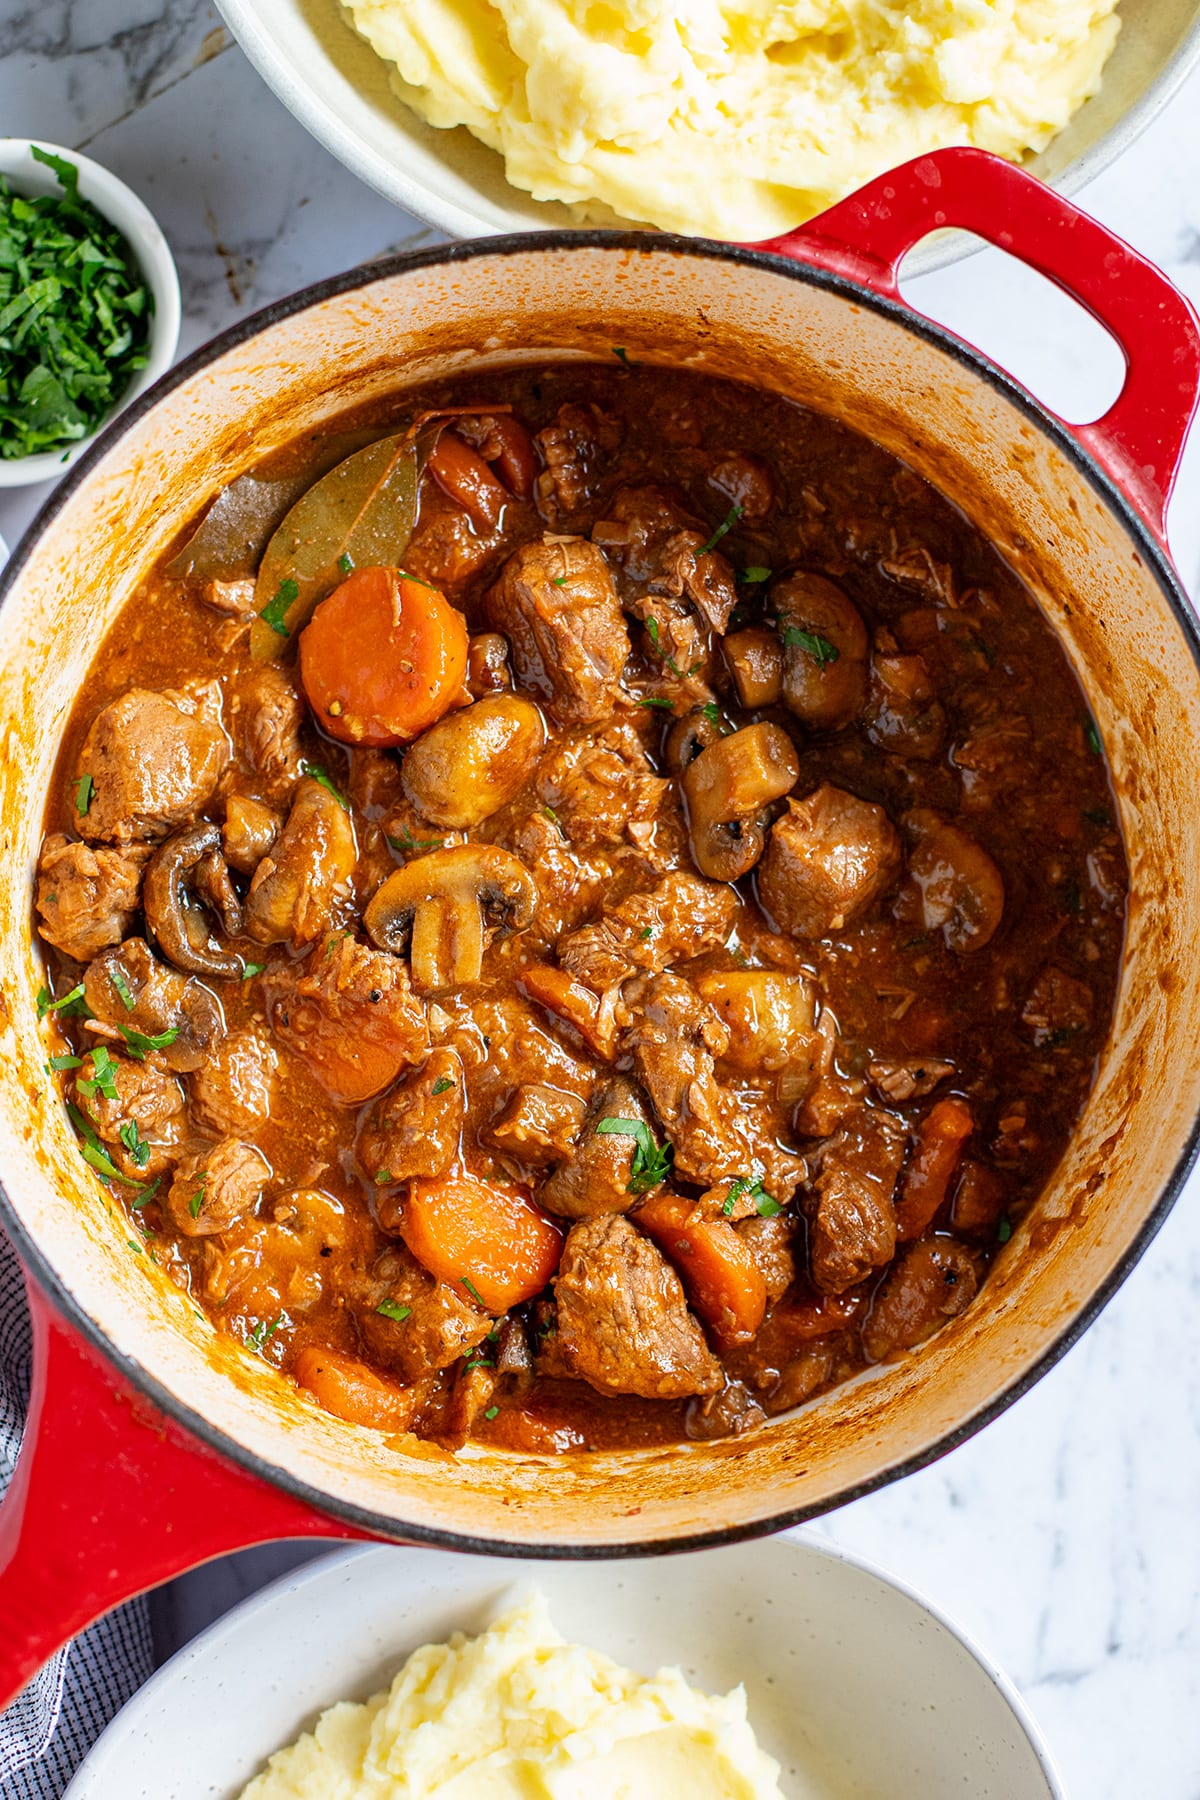 Beef stew with mushroom and carrots